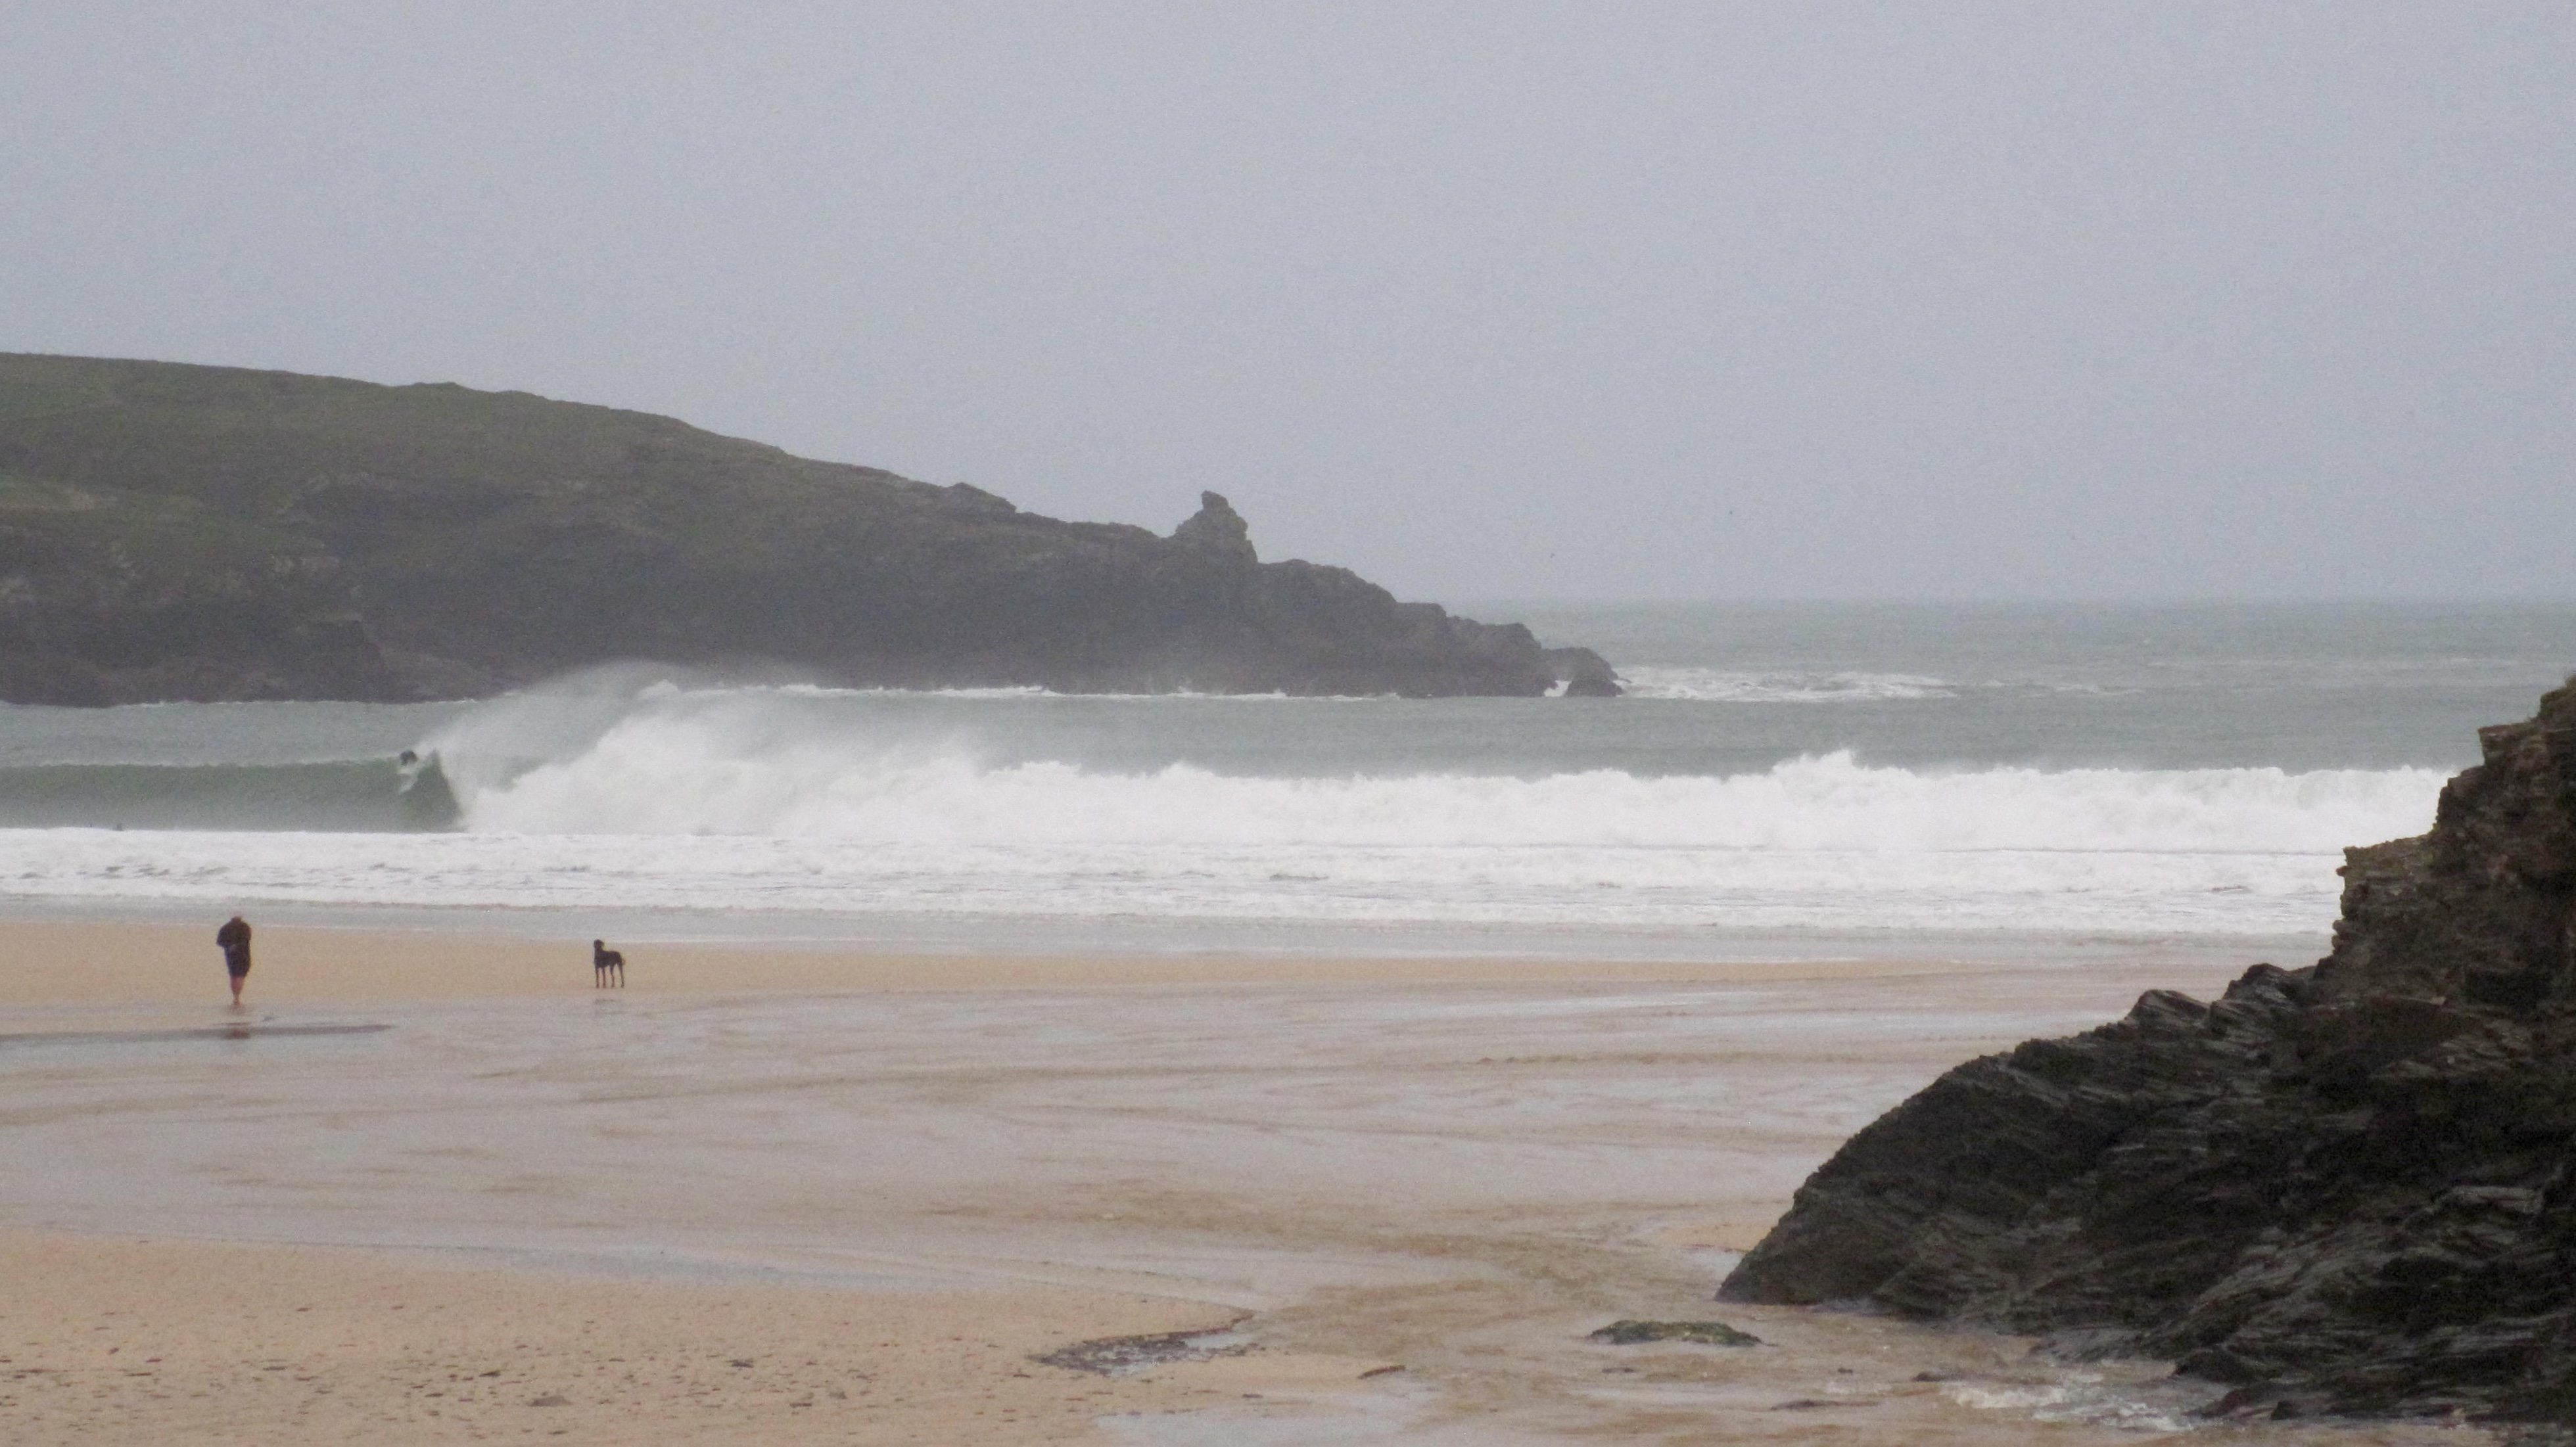 Surf Report for Tuesday 10th November 2015